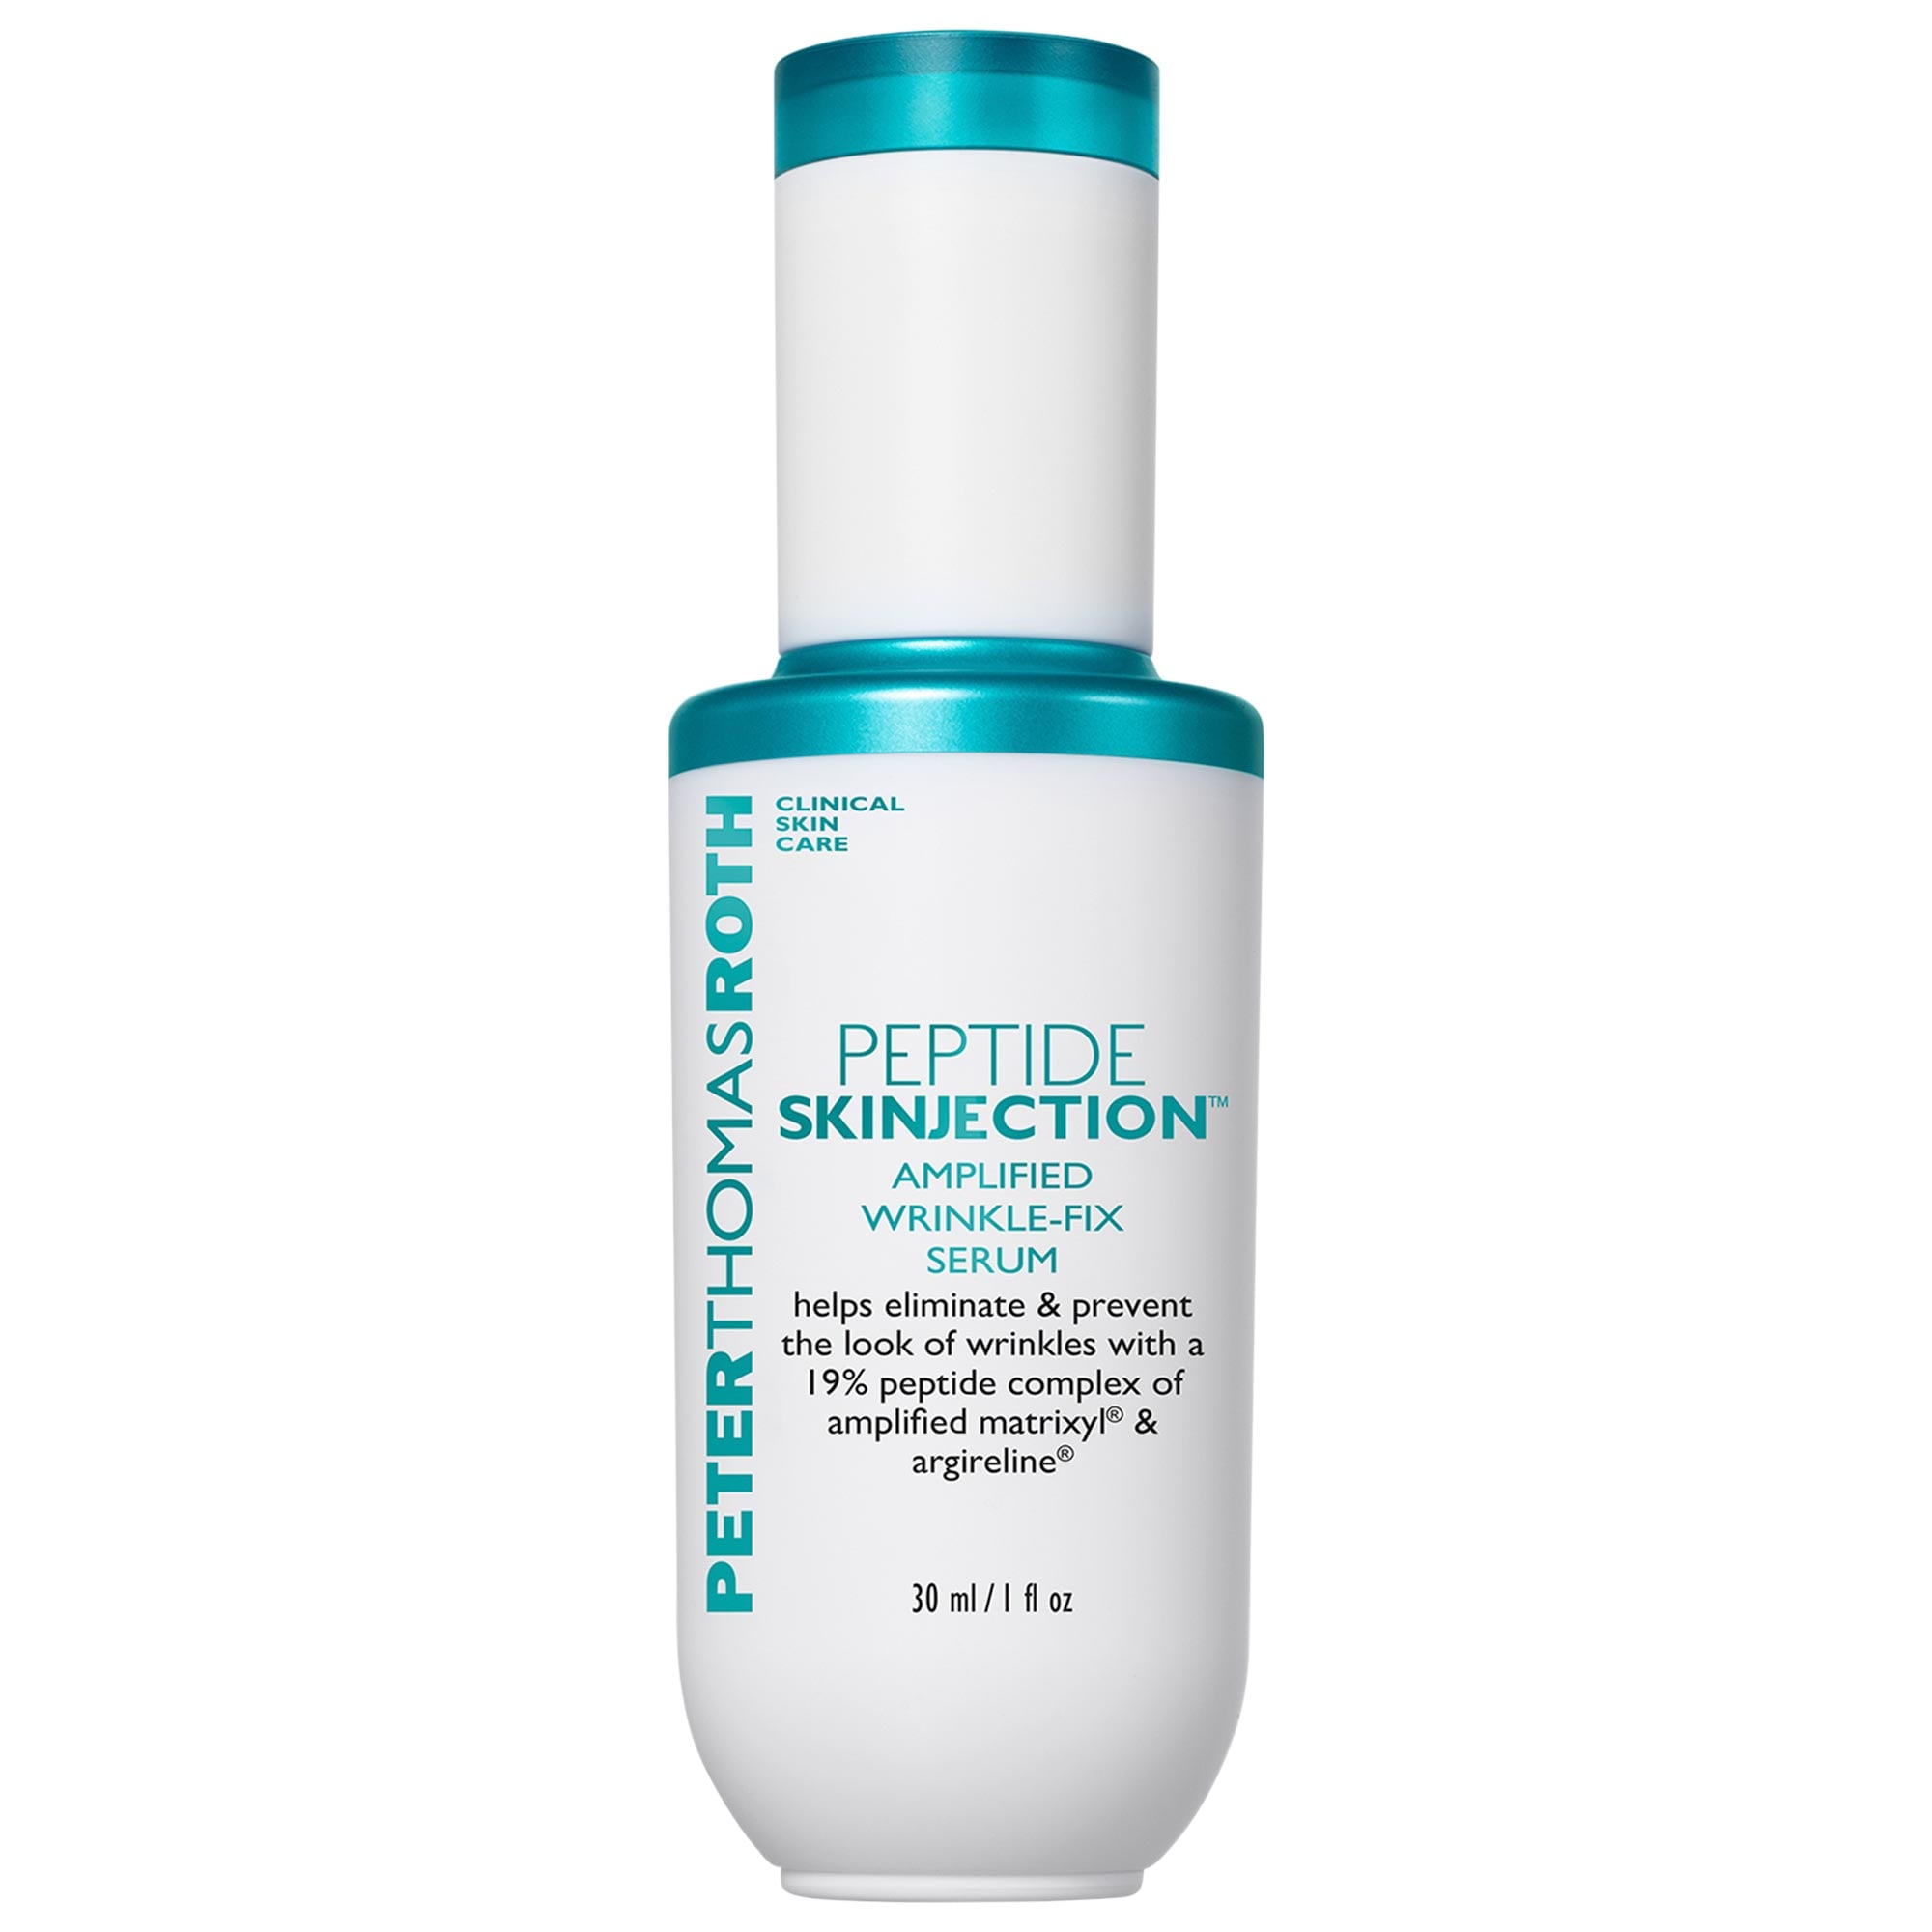 Peptide Skinjection™ Amplified Wrinkle-Fix Refillable Serum						 Peter Thomas Roth